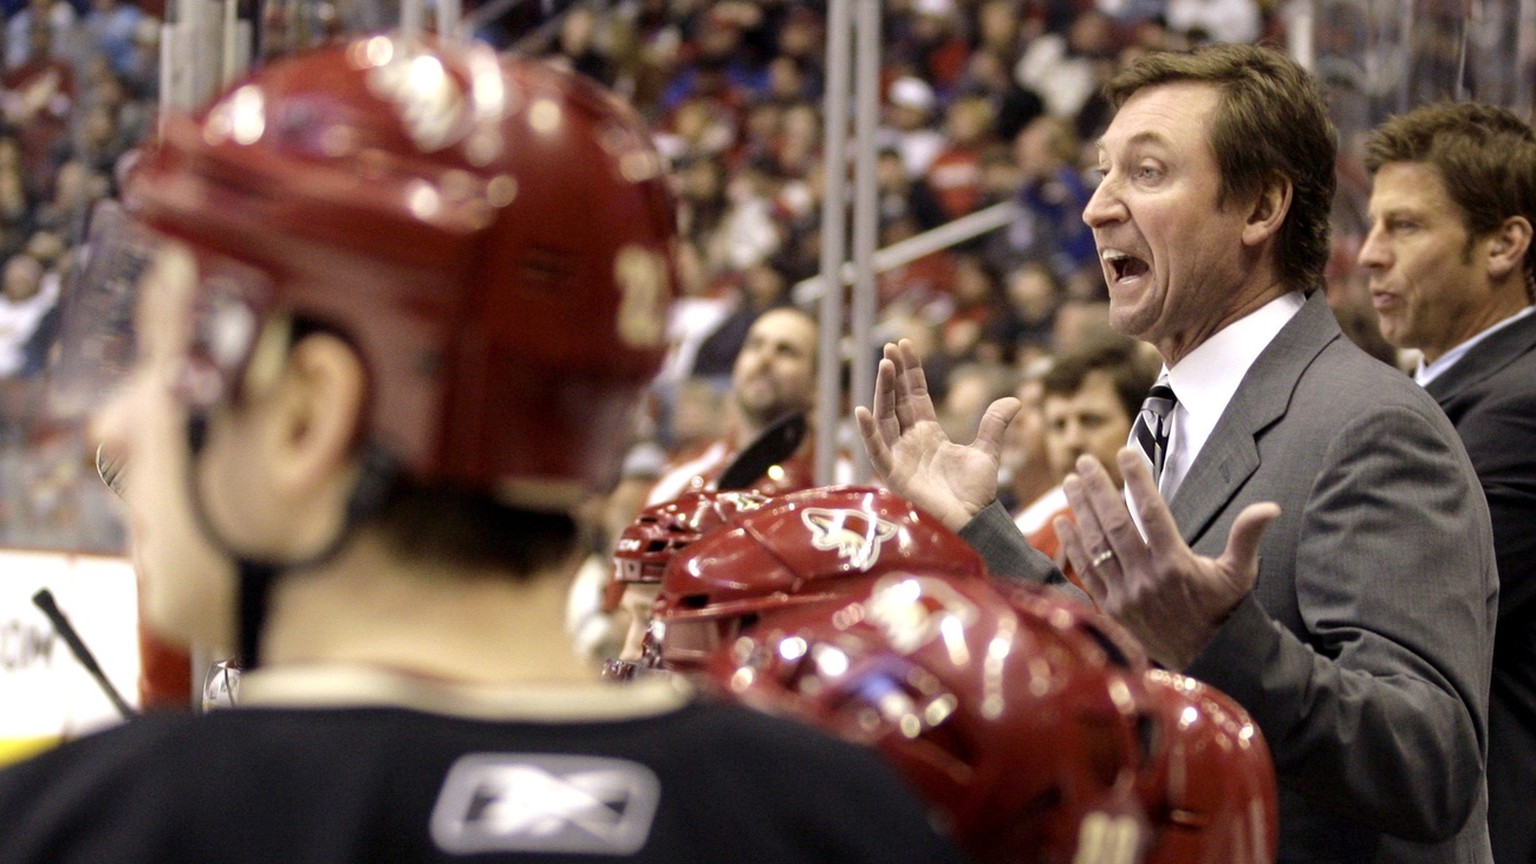 Phoenix Coyotes coach Wayne Gretzky, second from right, argues a call after the referee called a penalty against his team against the Los Angeles Kings in the first period of an NHL hockey game Saturd ...